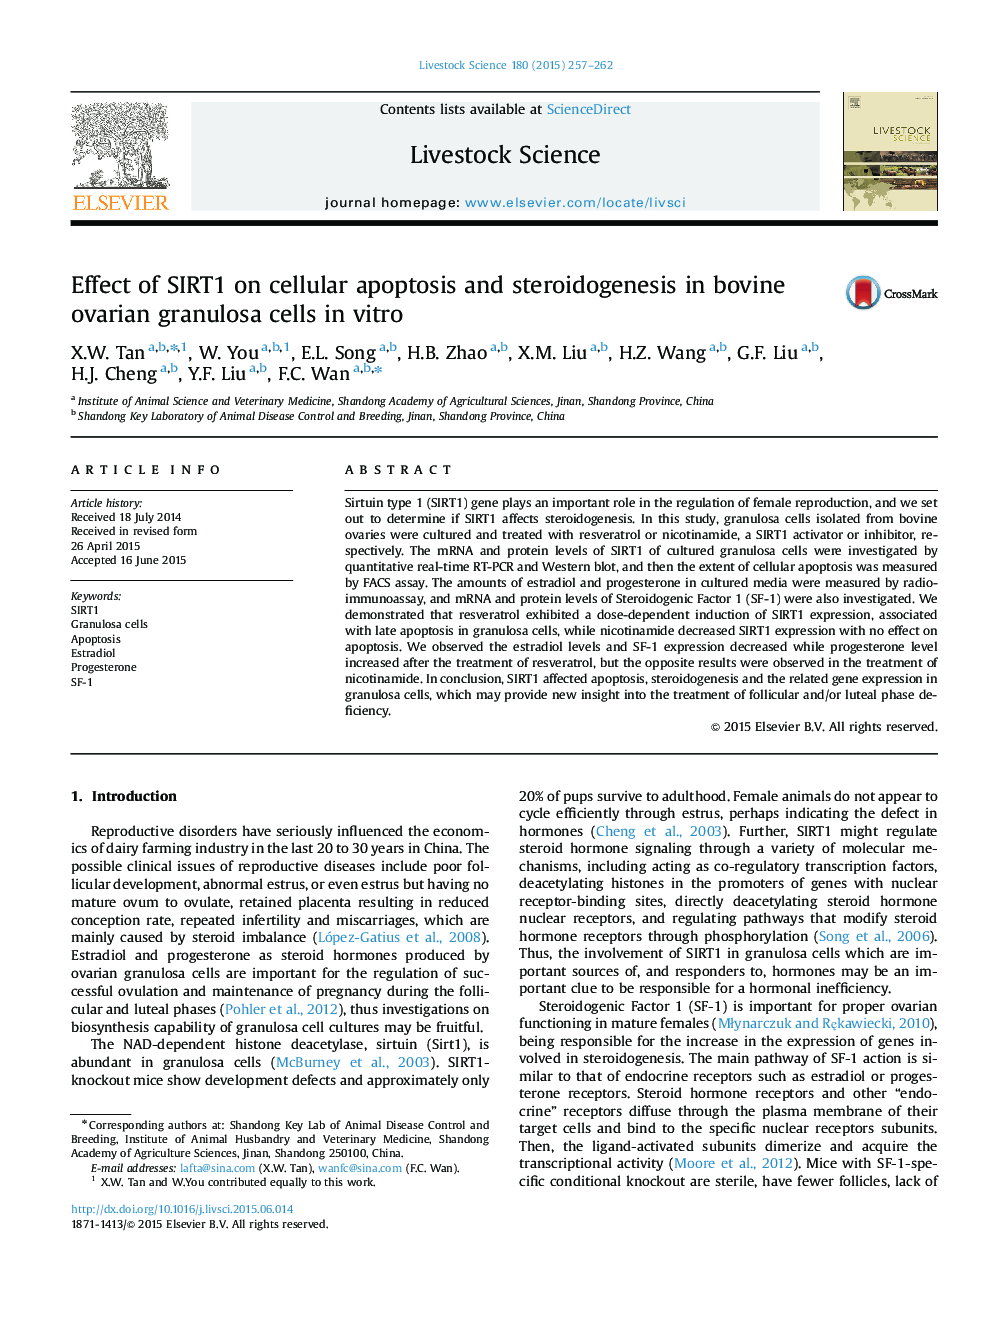 Effect of SIRT1 on cellular apoptosis and steroidogenesis in bovine ovarian granulosa cells in vitro